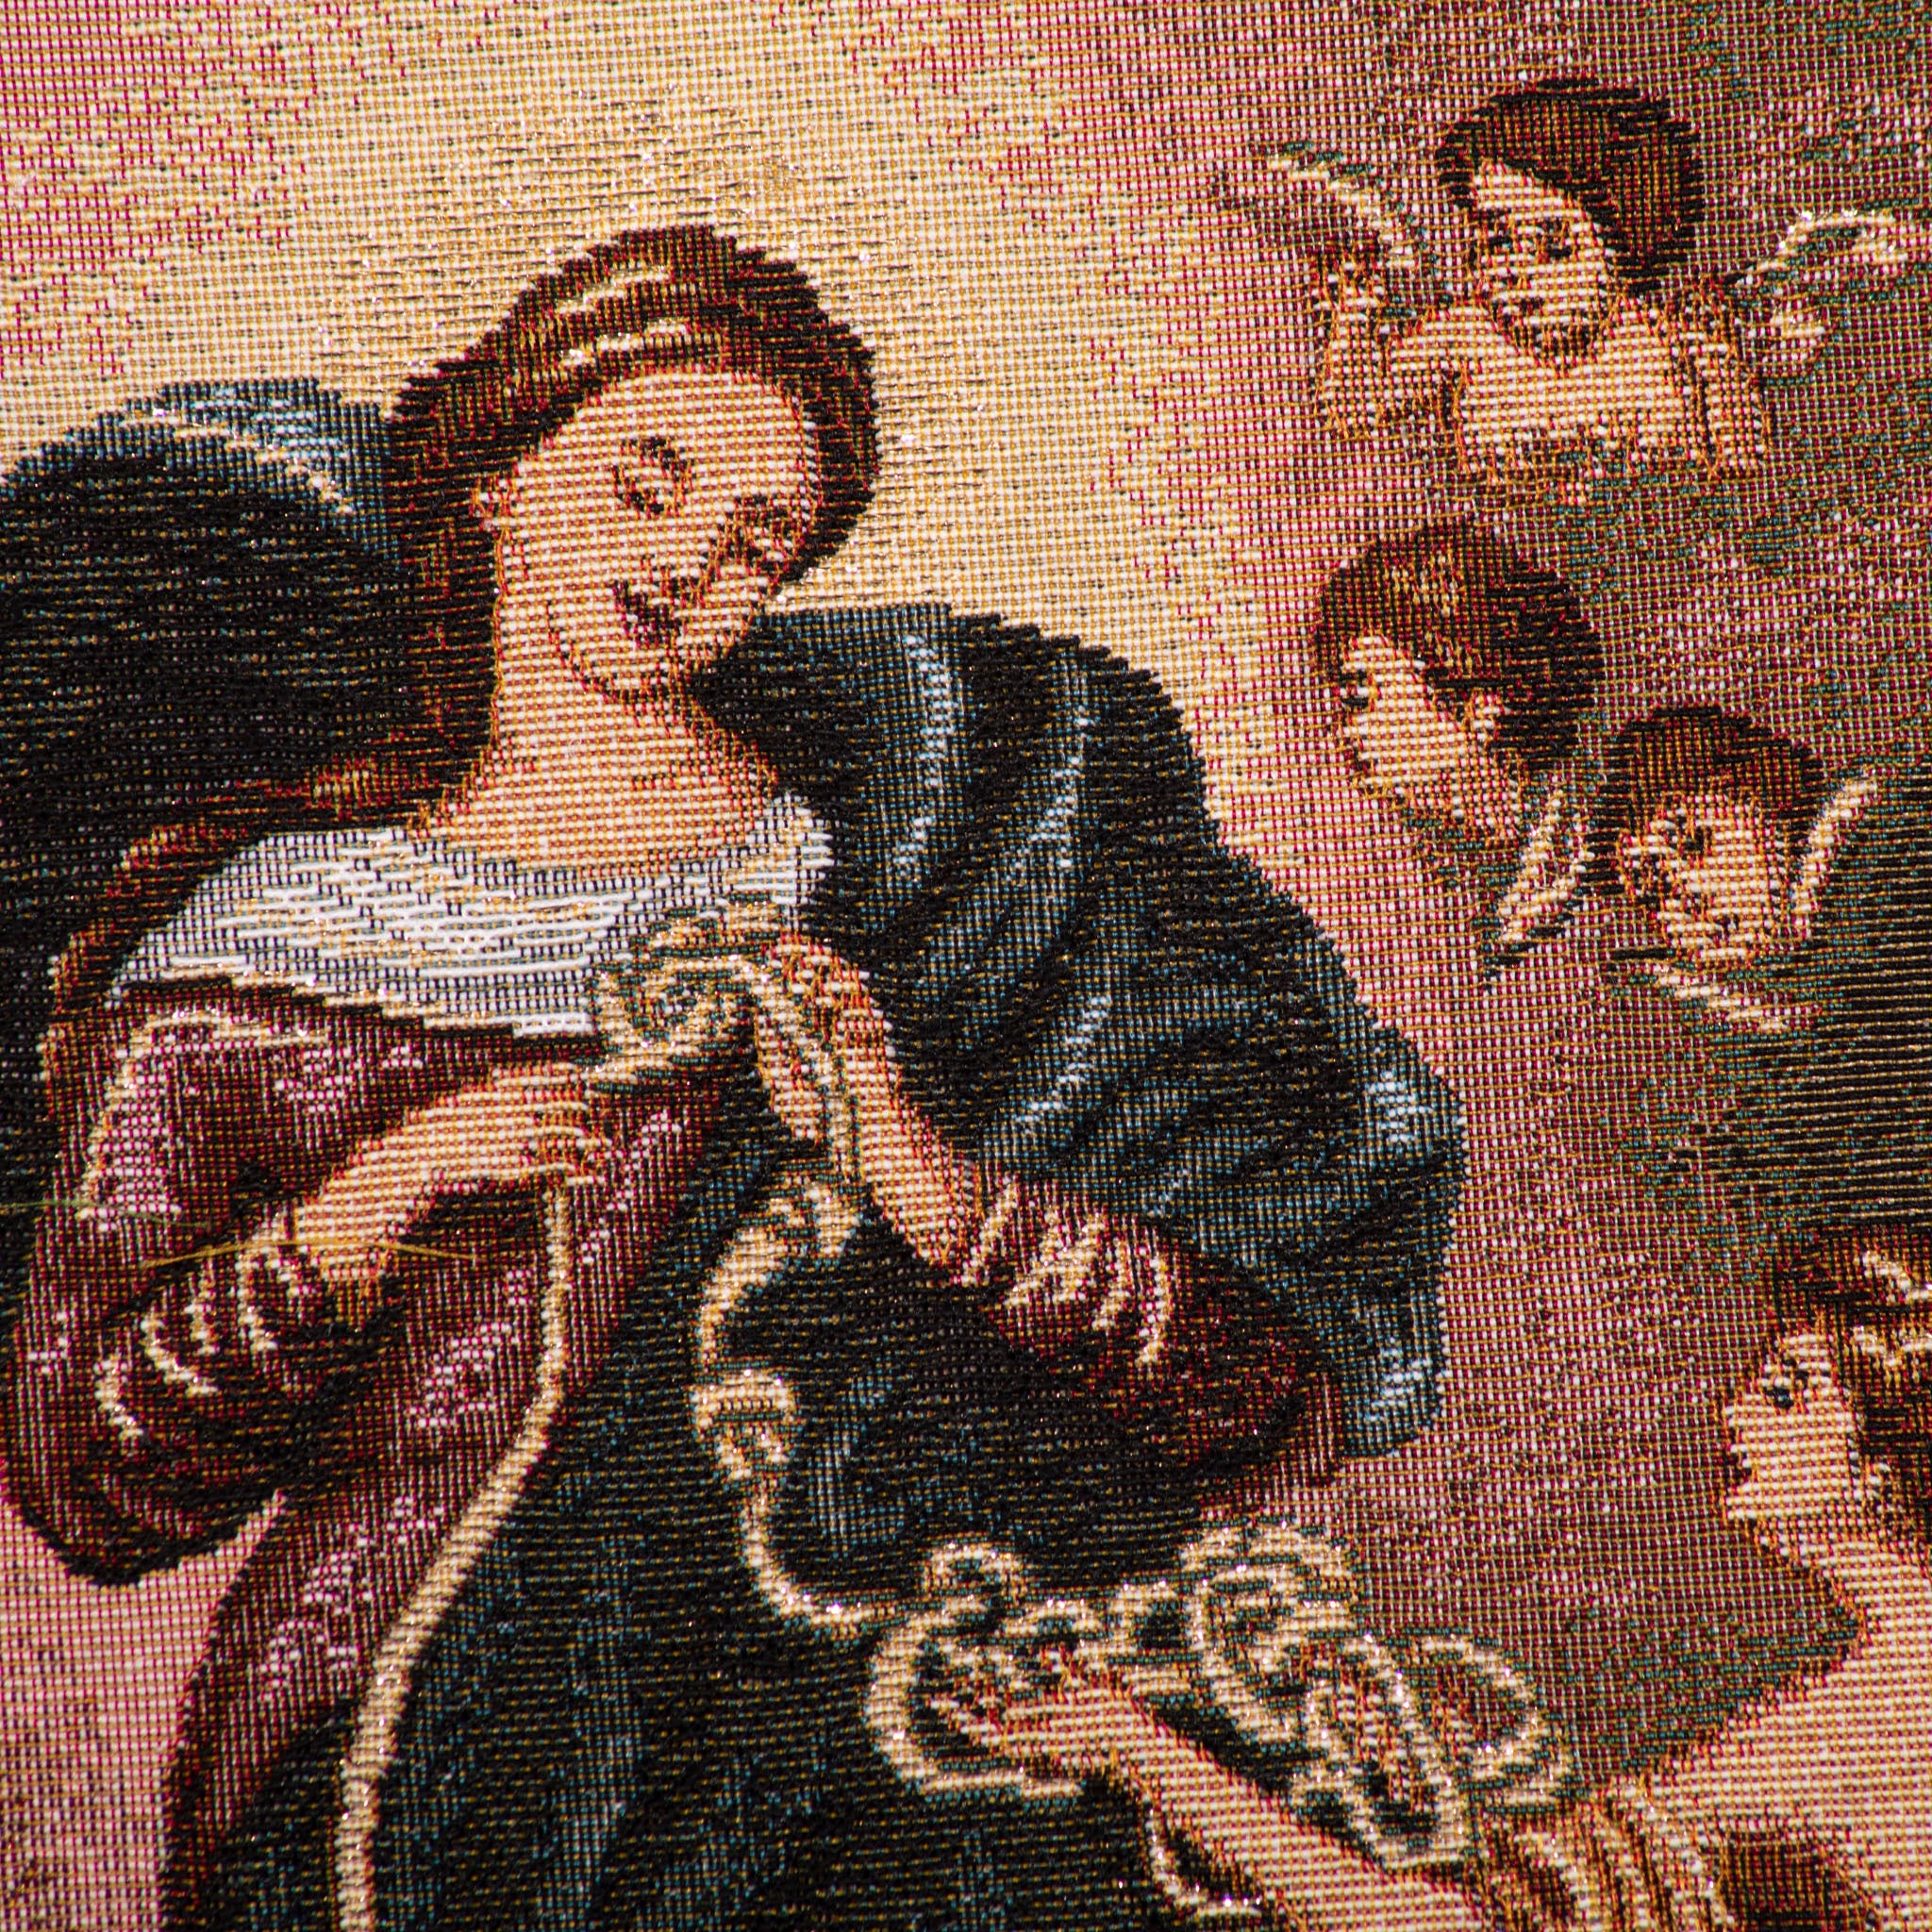 Tapestry of Our Lady Untying Knots